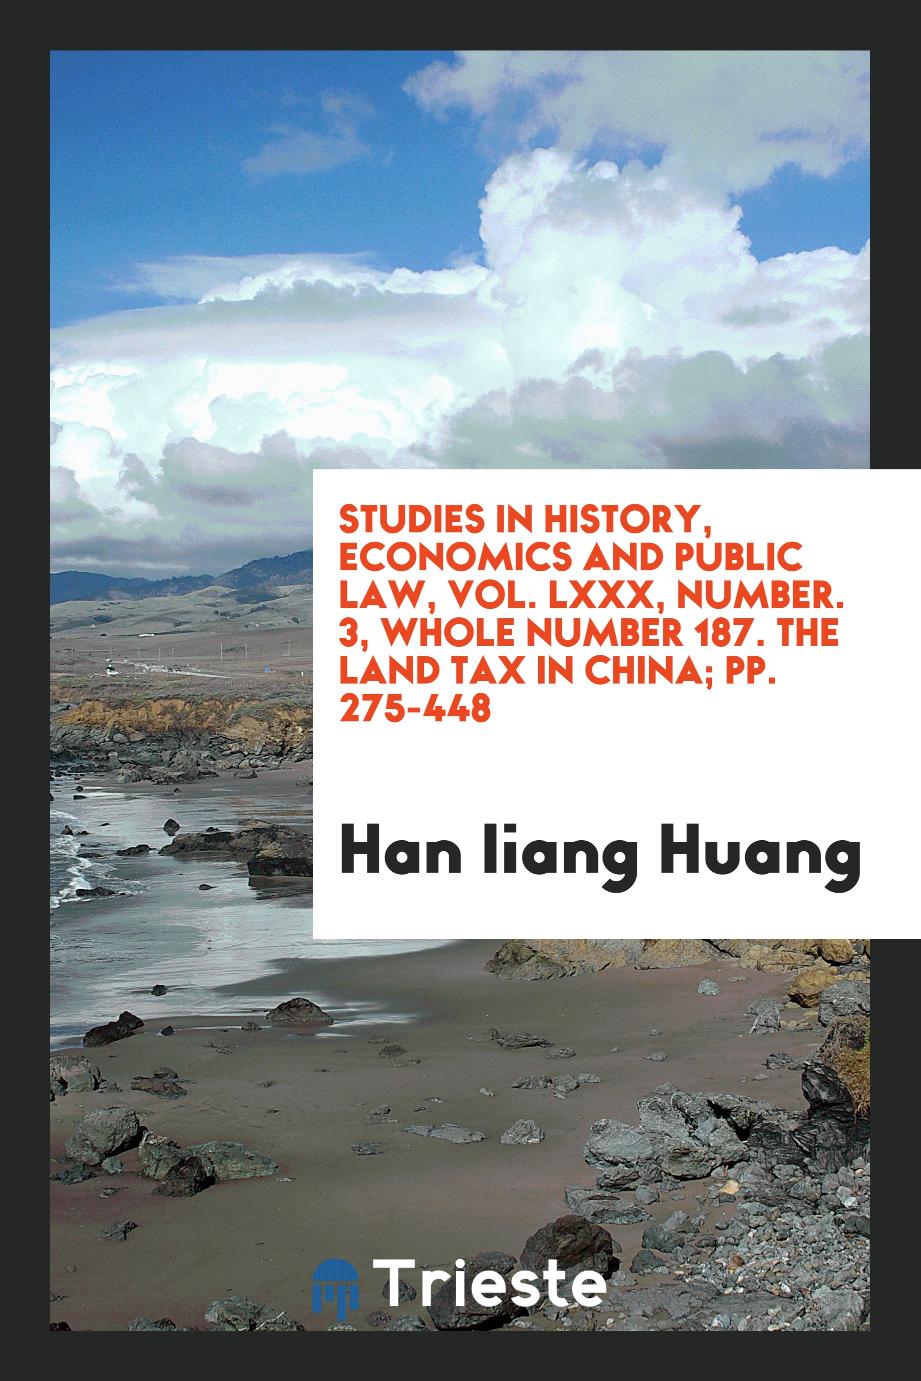 Studies in history, economics and public law, Vol. LXXX, Number. 3, Whole Number 187. The land tax in China; pp. 275-448